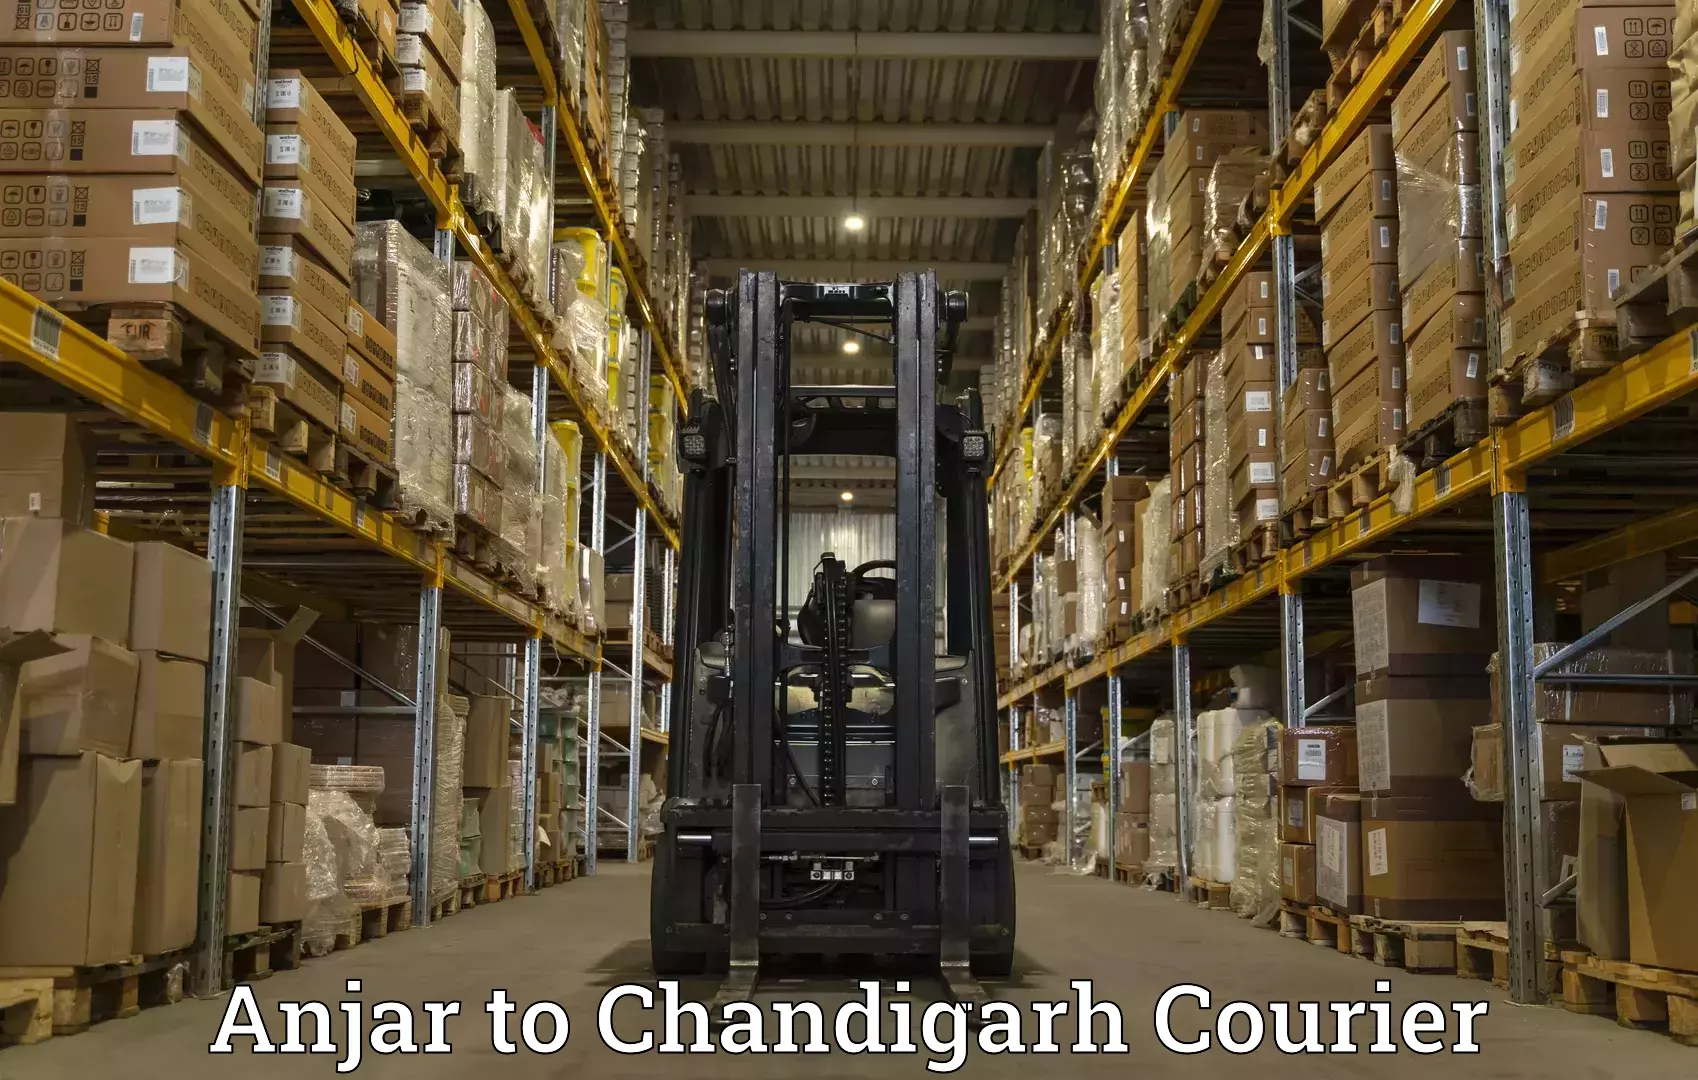 Ocean freight courier Anjar to Chandigarh